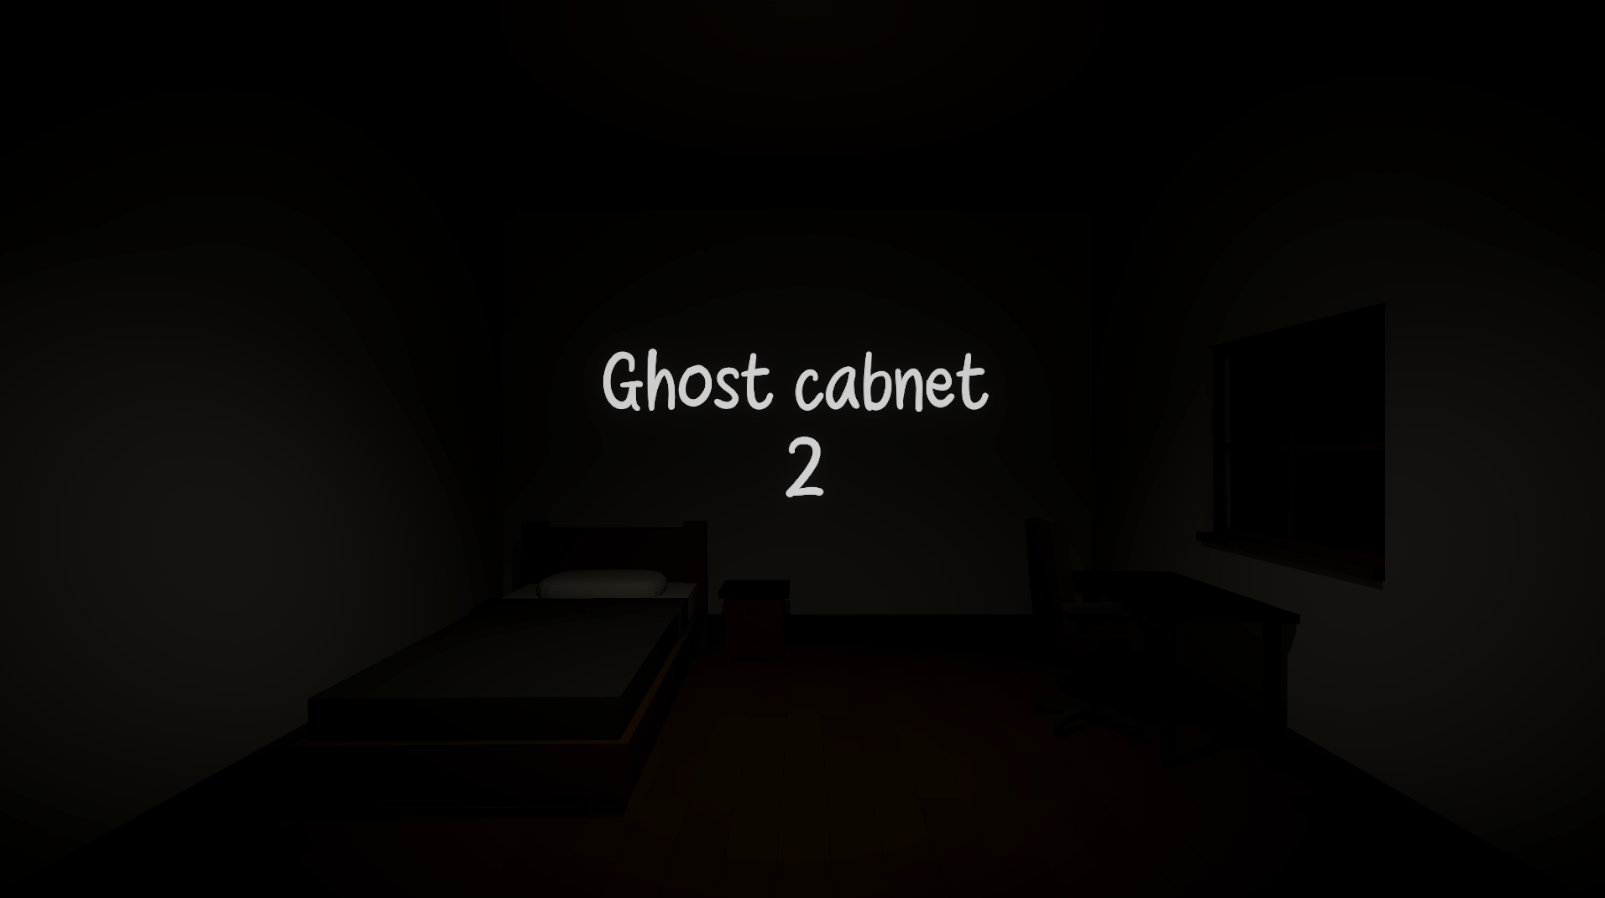 Ghost cabnet 2